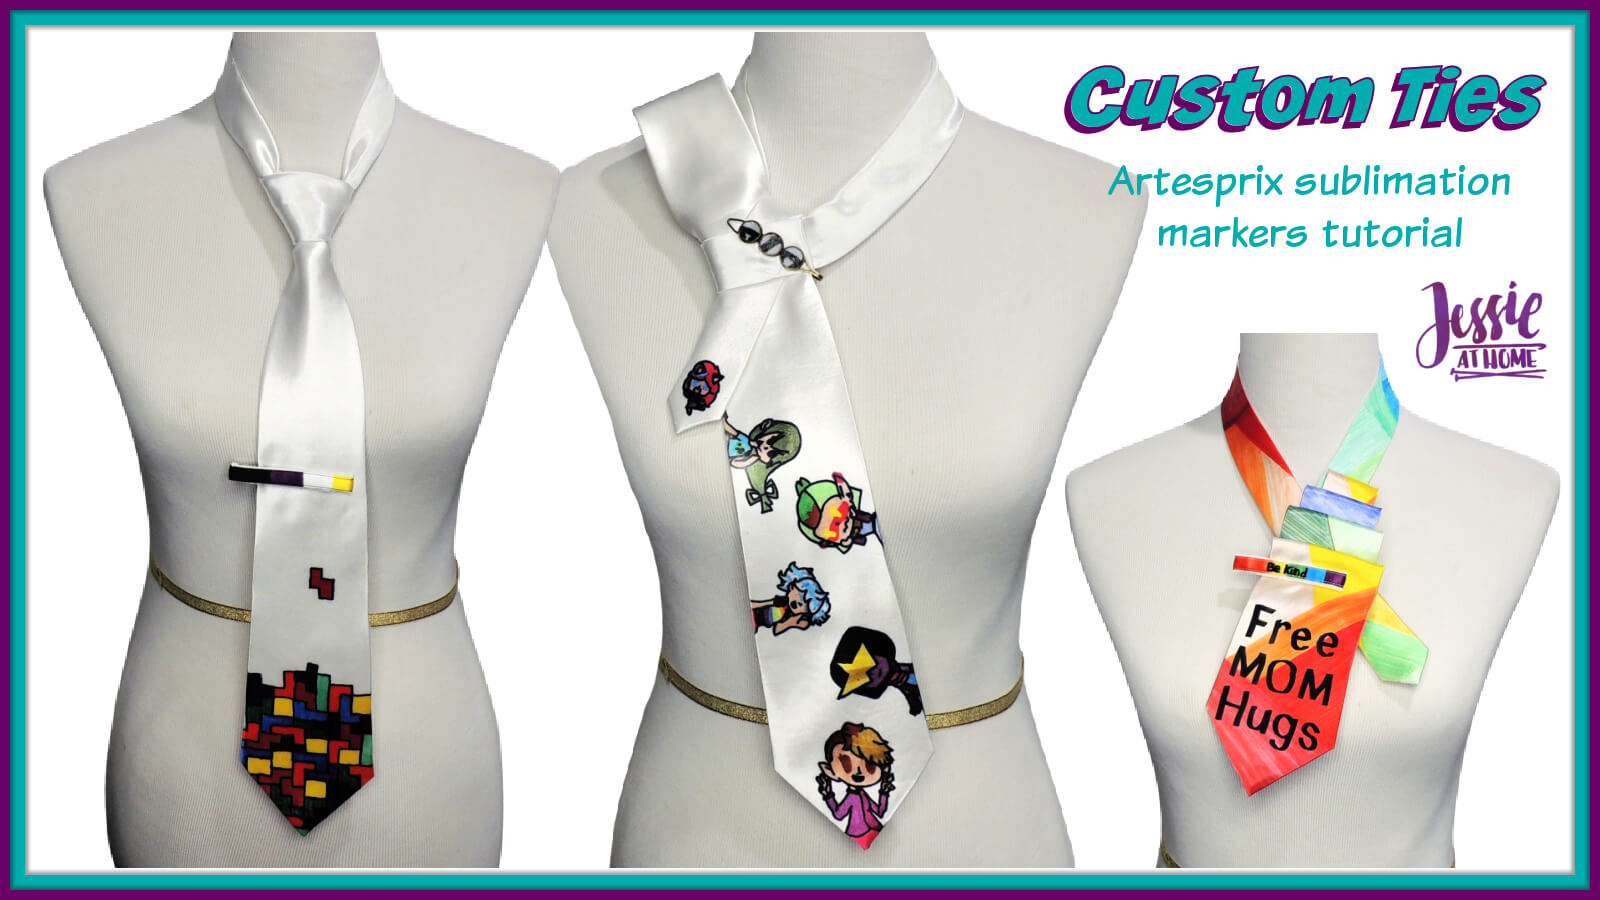 Custom Ties - Artesprix Sublimation Markers Tutorial by Jessie At Home - Social